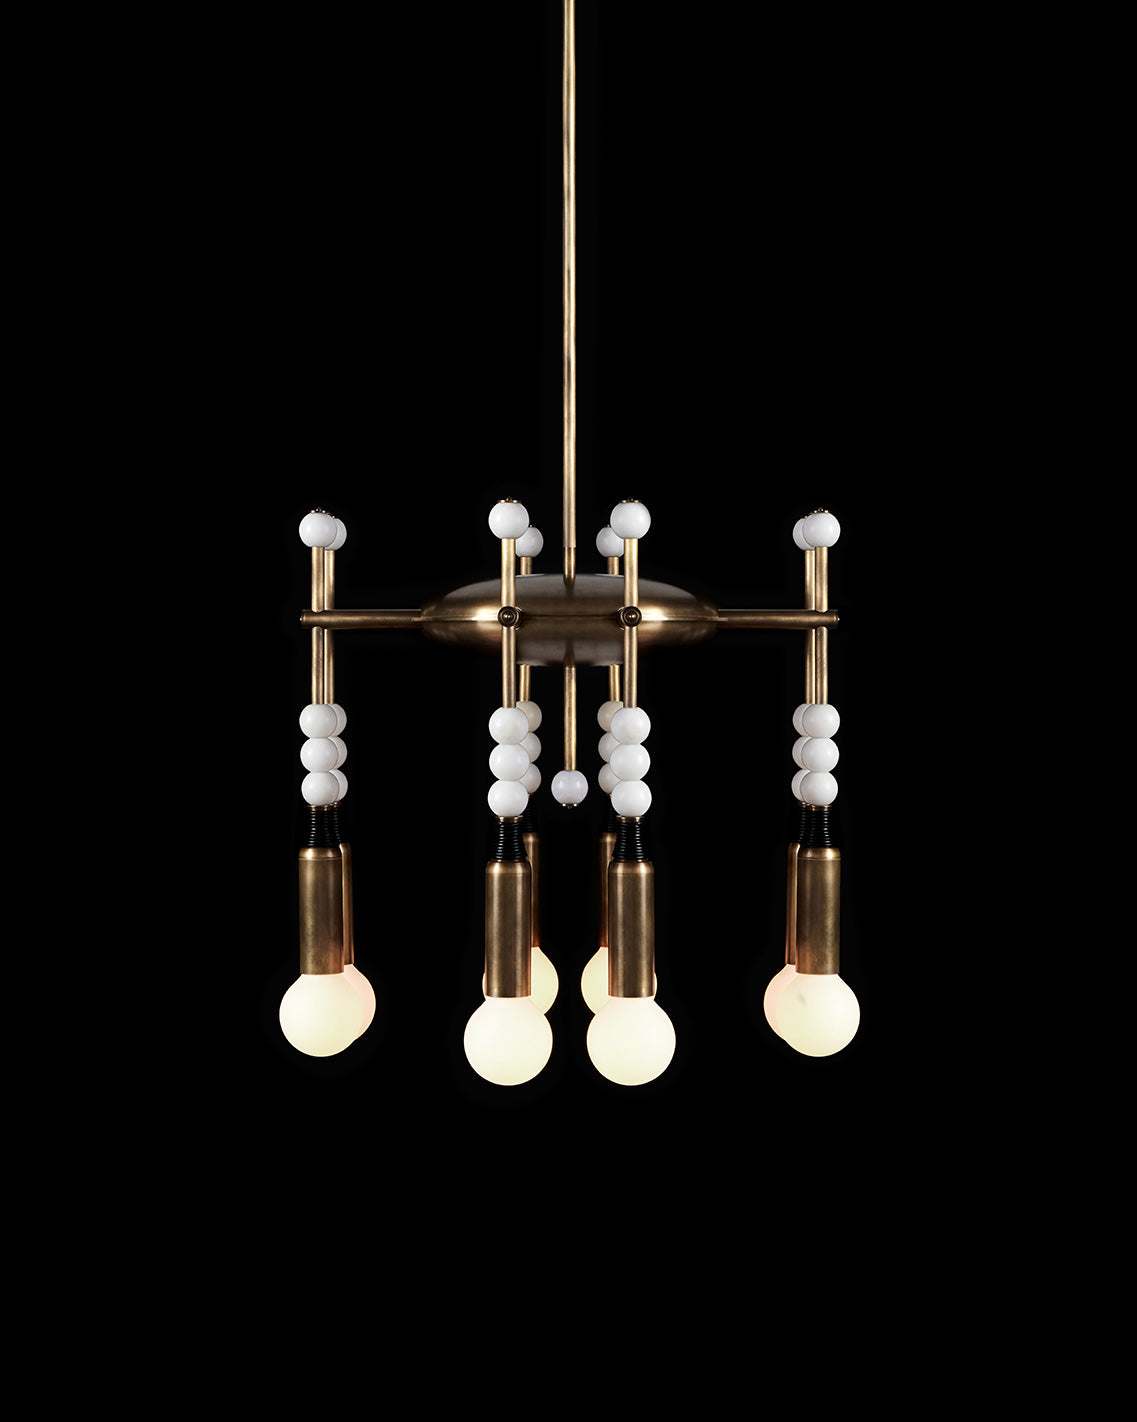 TALISMAN : 8 chandelier in Aged Brass and Black Leather with White Jade stone, against a black background. 